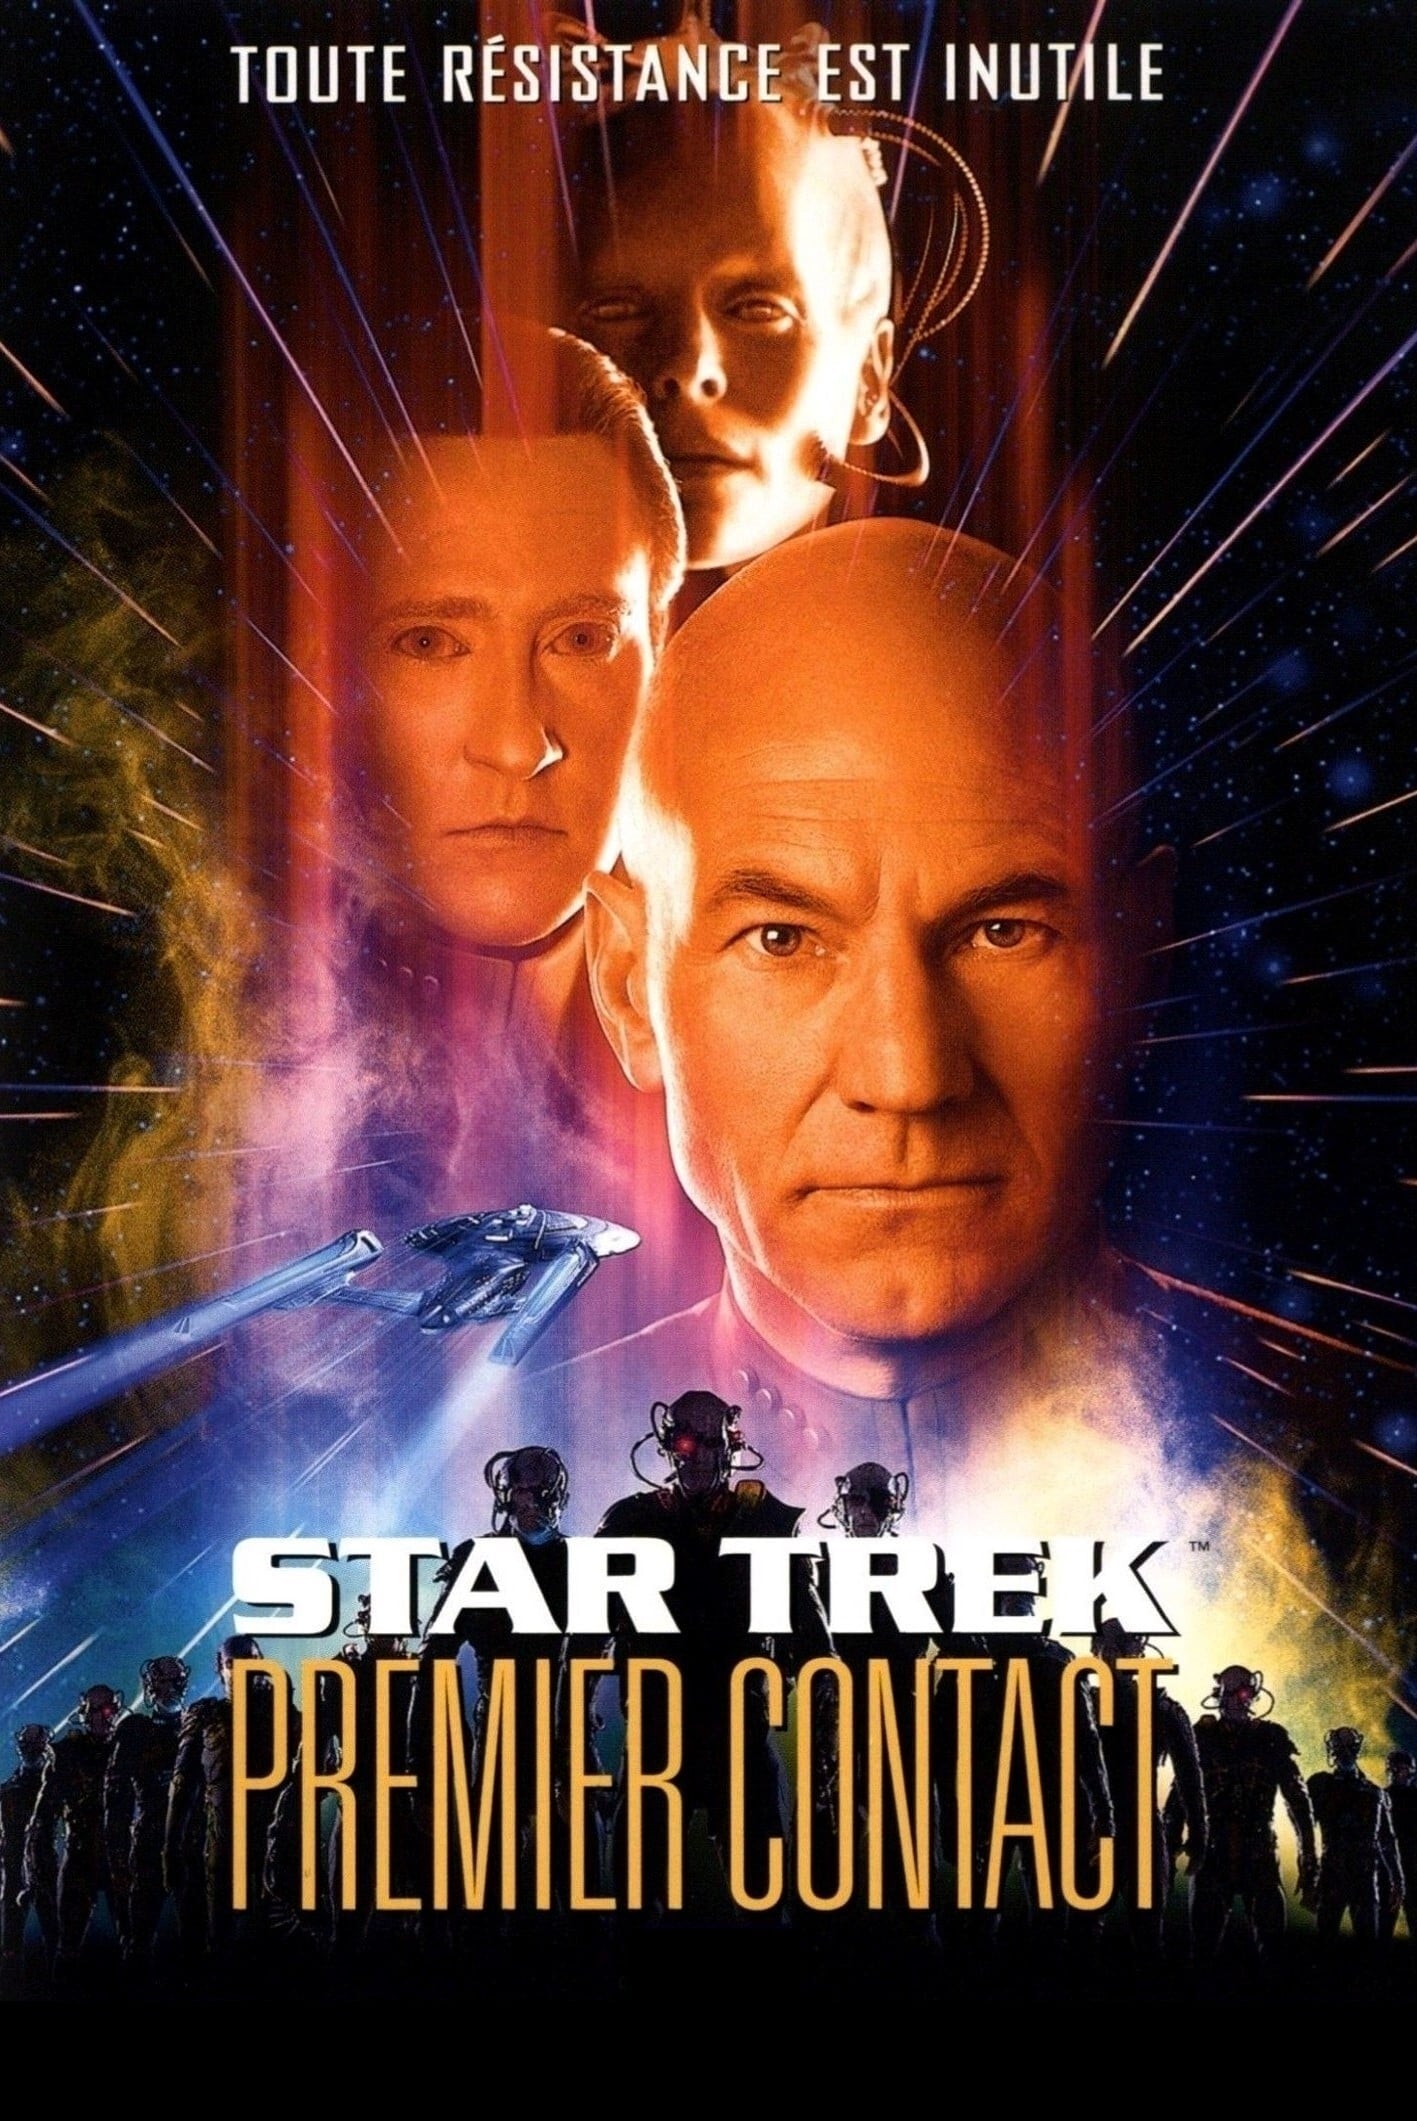 star trek first contact archive.org